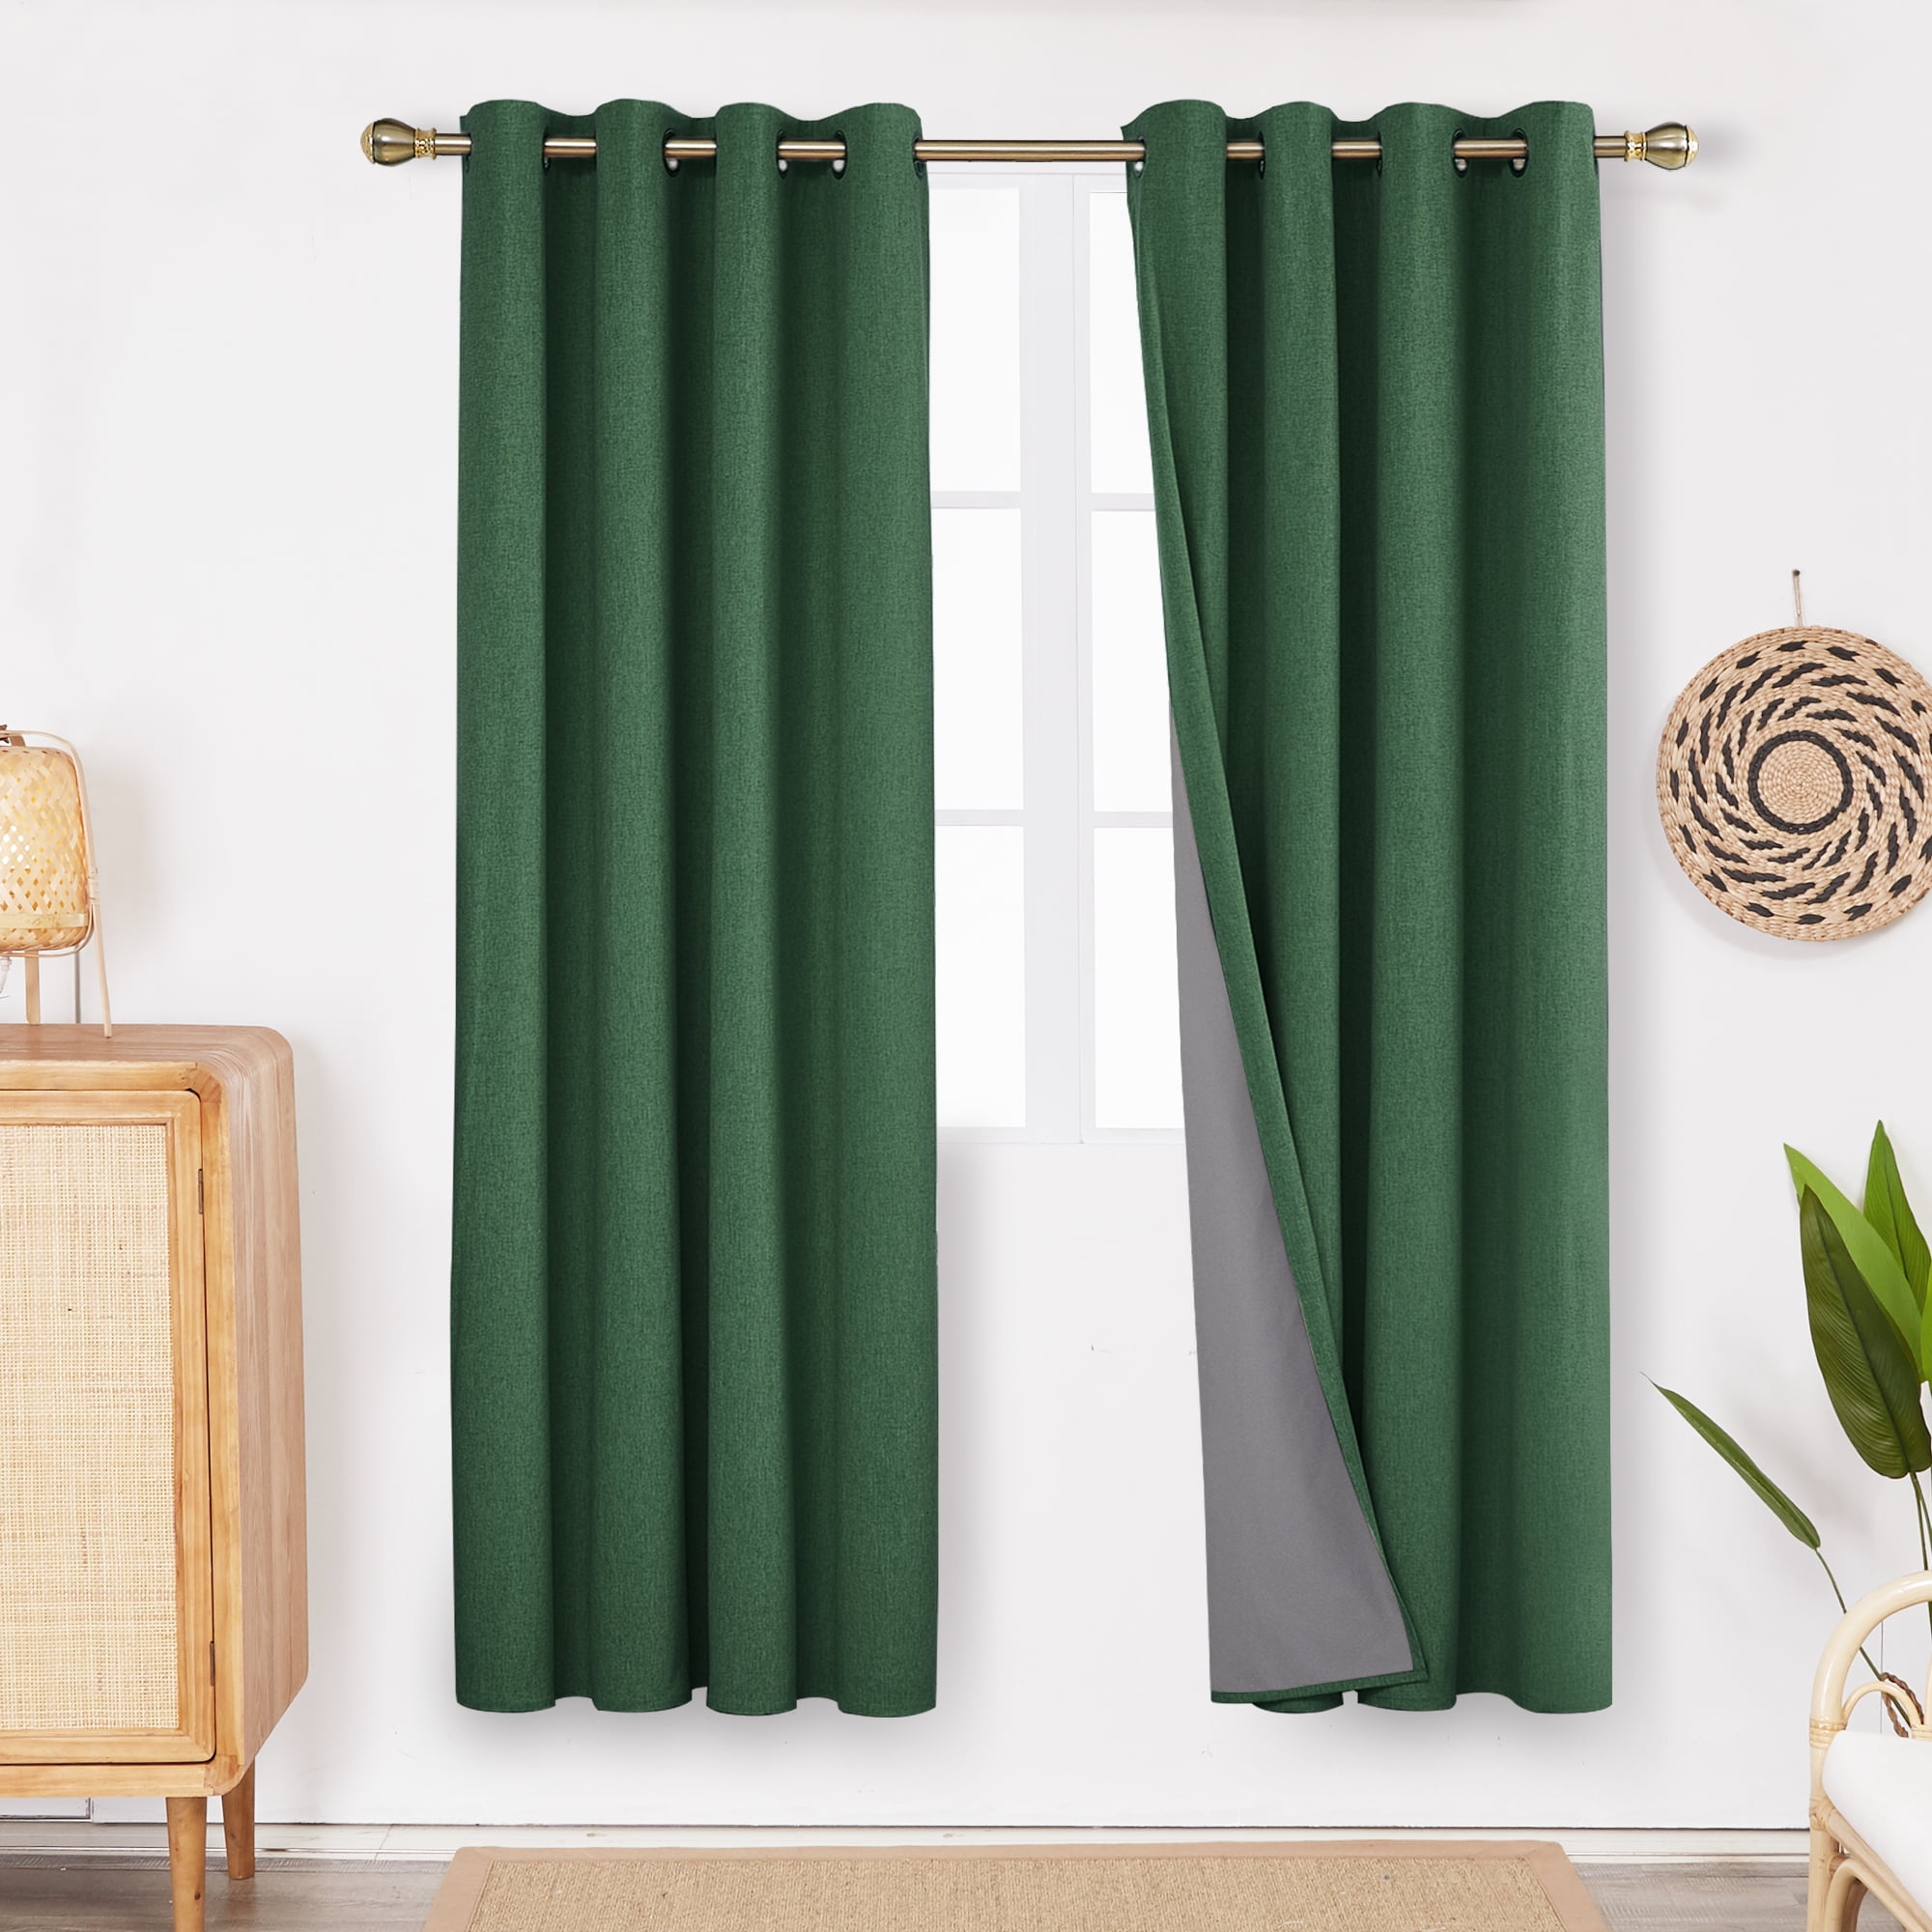 Details about   Window Curtain Linen Solid Curtain Full Shading Drapes Heat Blocking Decoration 